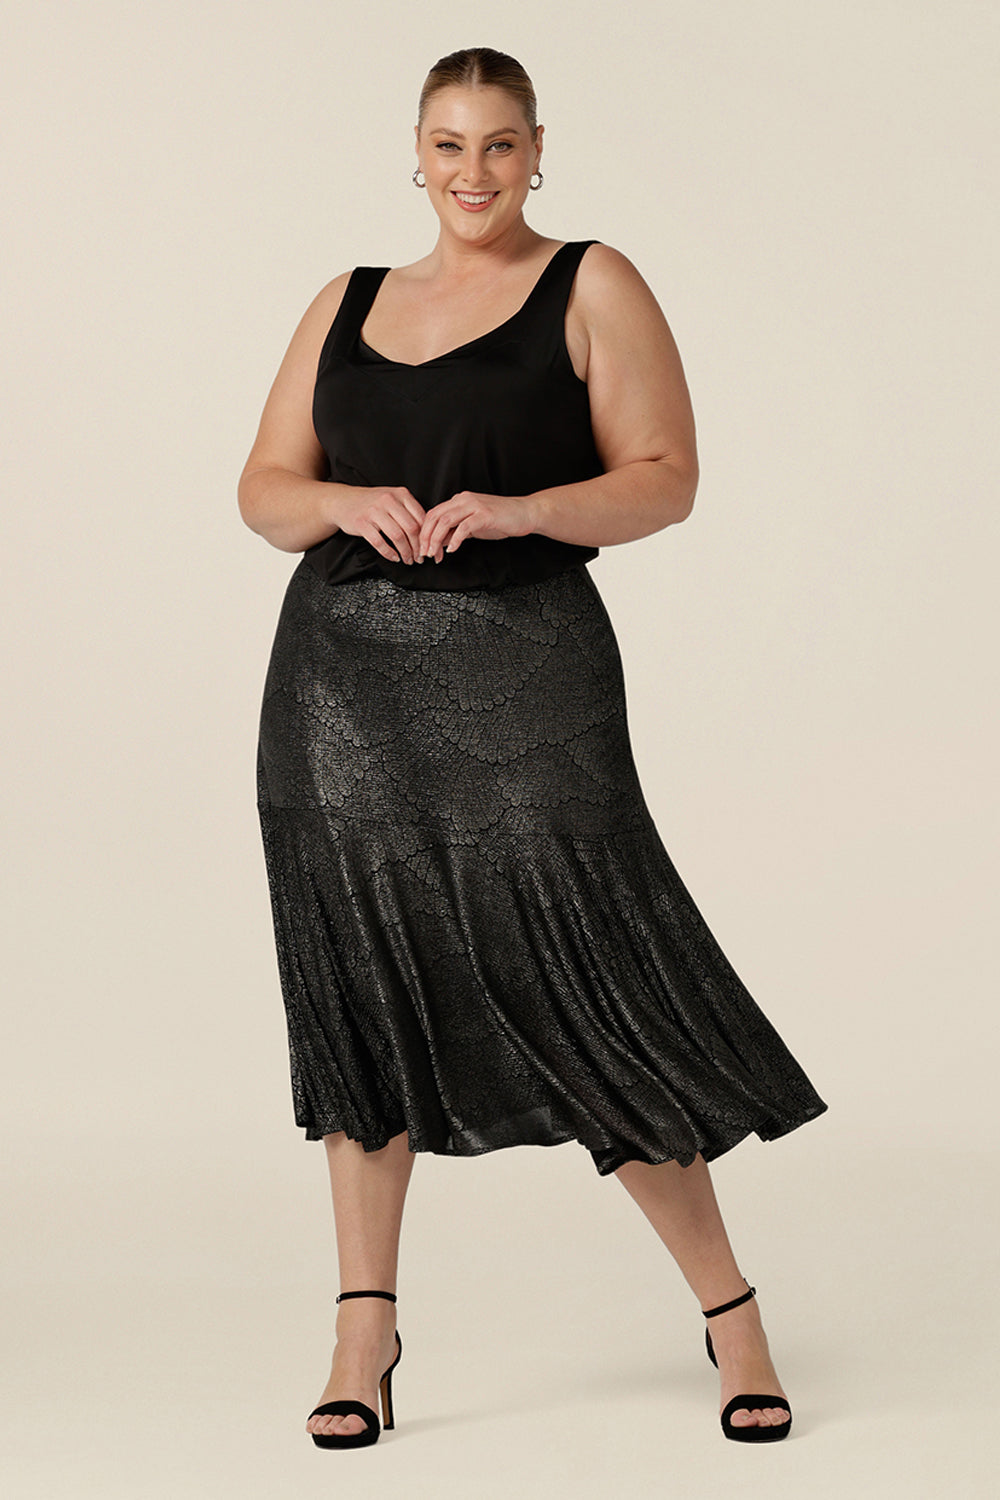 A size 18, plus size woman wears a midi length, foil print evening skirt with ruffle hem. For cocktail and evening wear, this elegant skirt is worn with a black cami top. Both going out skirt and top are made in Australia by women's fashion brand, Leina & Fleur. Shop their evening and cocktail wear online in sizes 8 to 24.